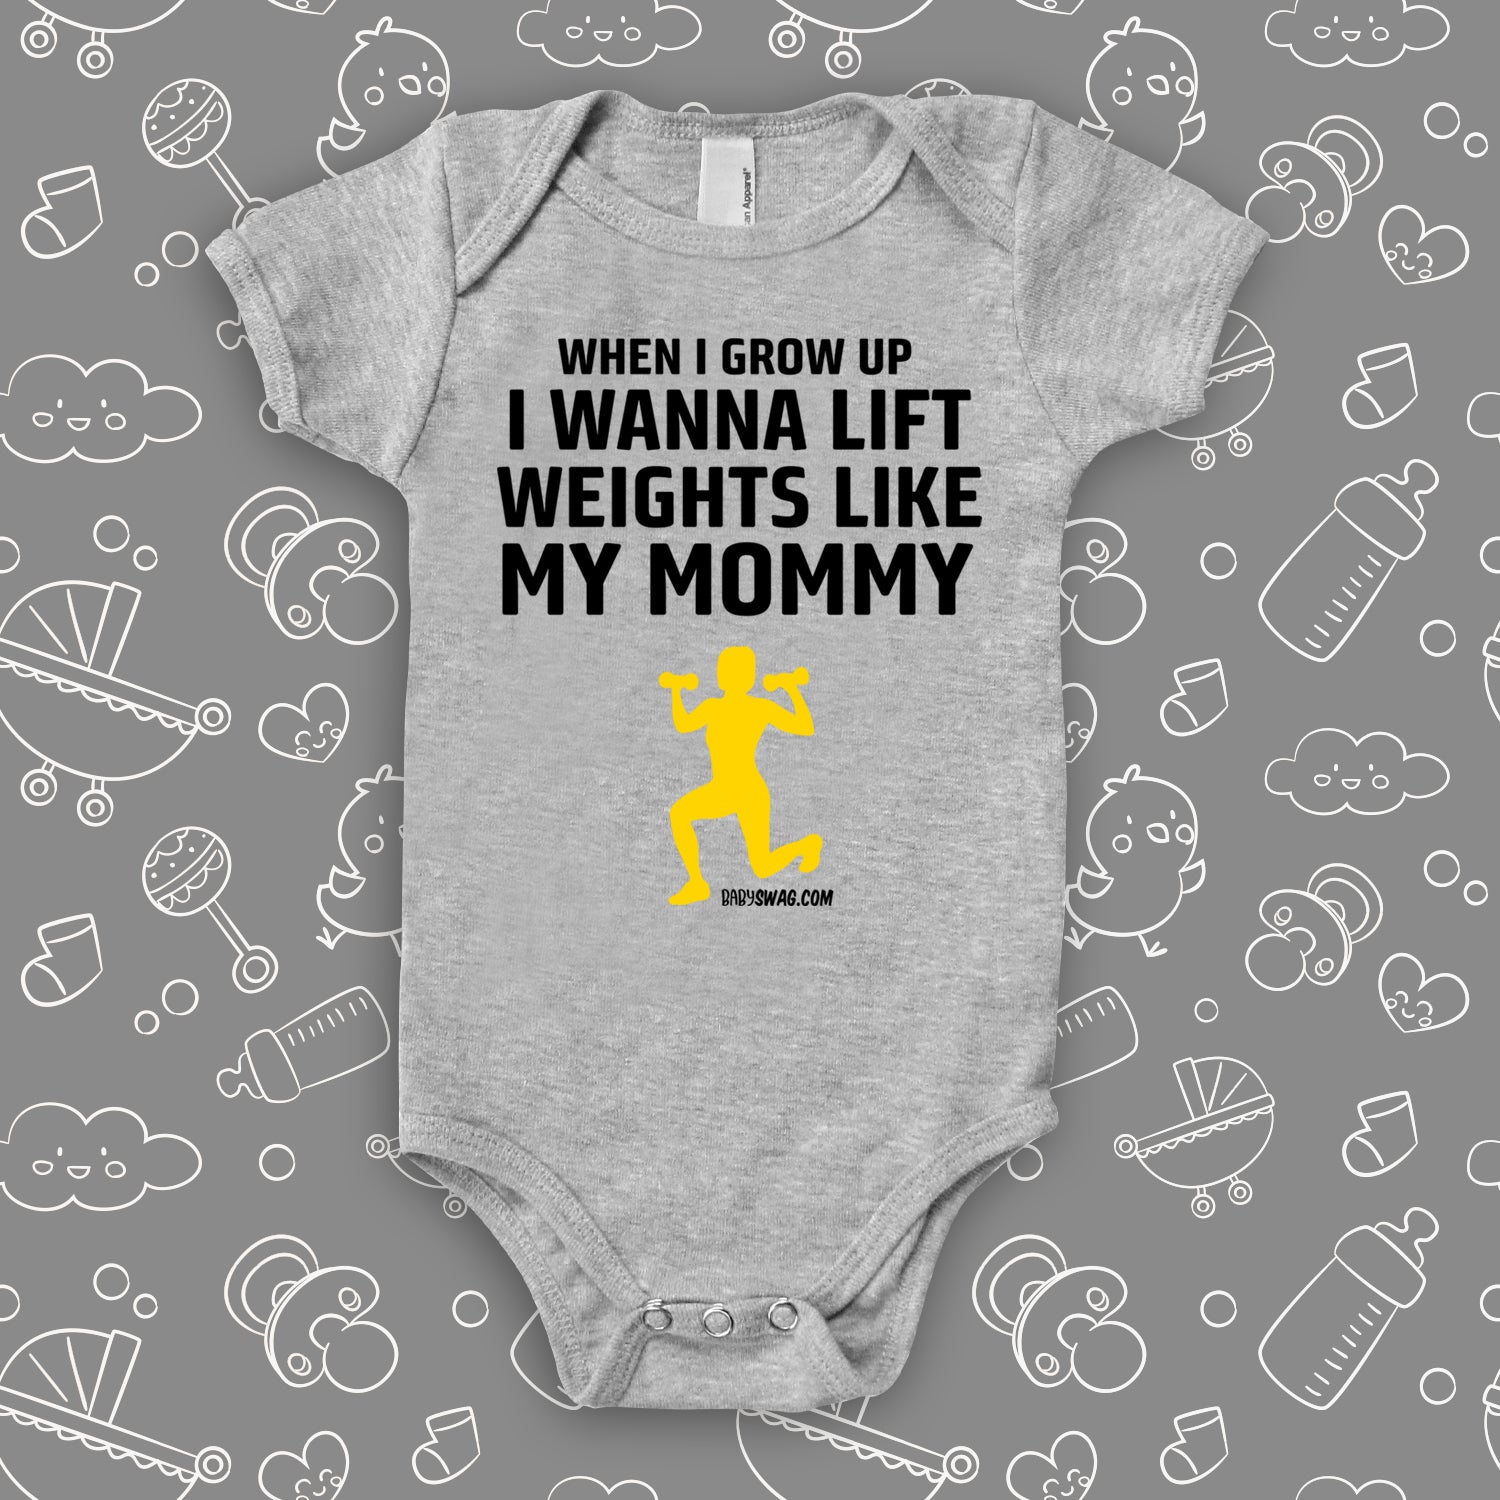 The ''When I Grow Up I Wanna Lift Weights Like My Mommy'' cool baby onesie in gray